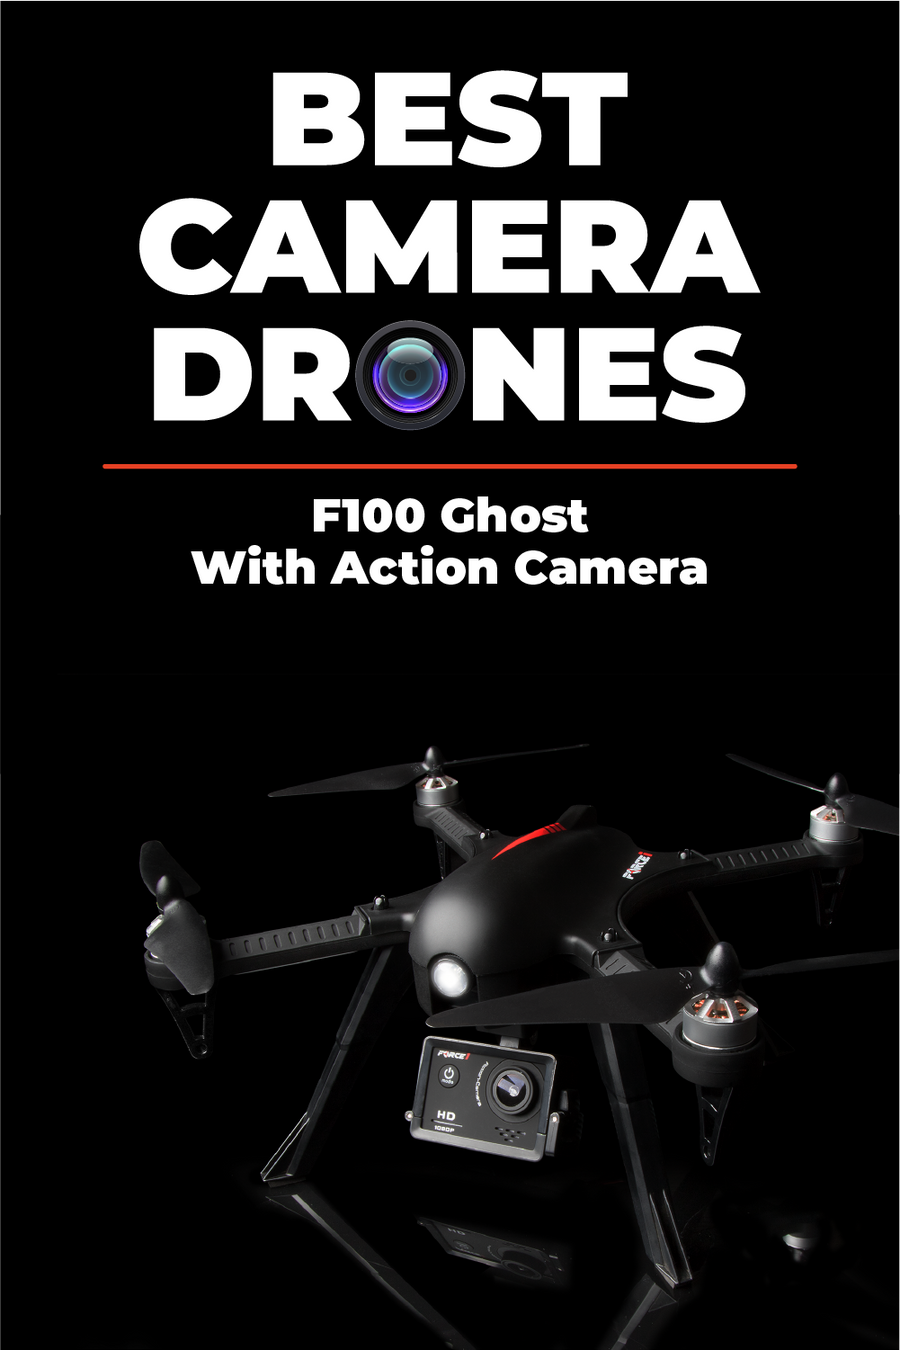 Newest Action Camera Drone – F100 Ghost Brushless Quadcopter Review - USA Toyz